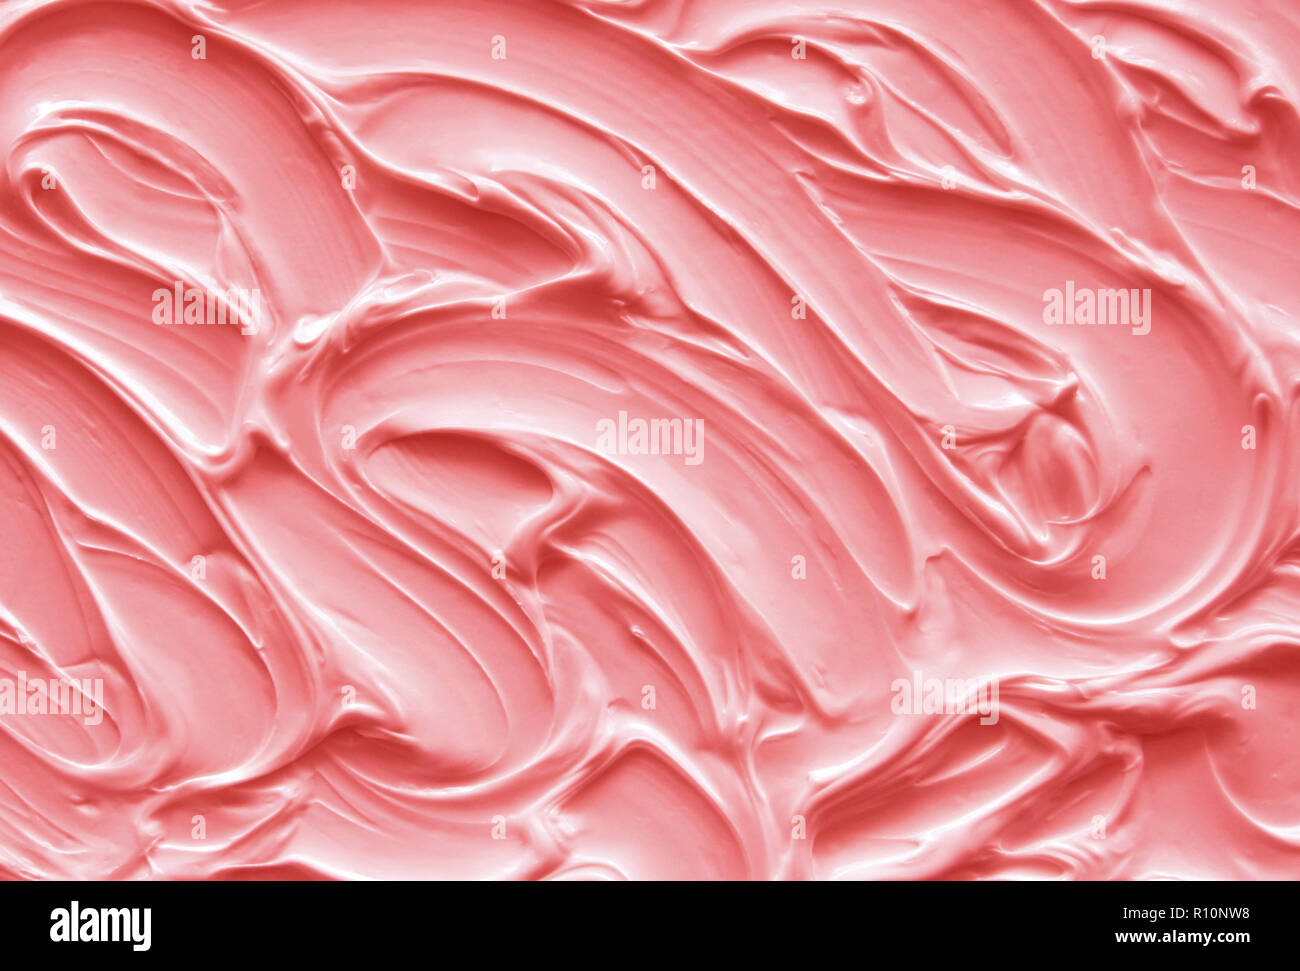 Pink frosting texture background Stock Photo